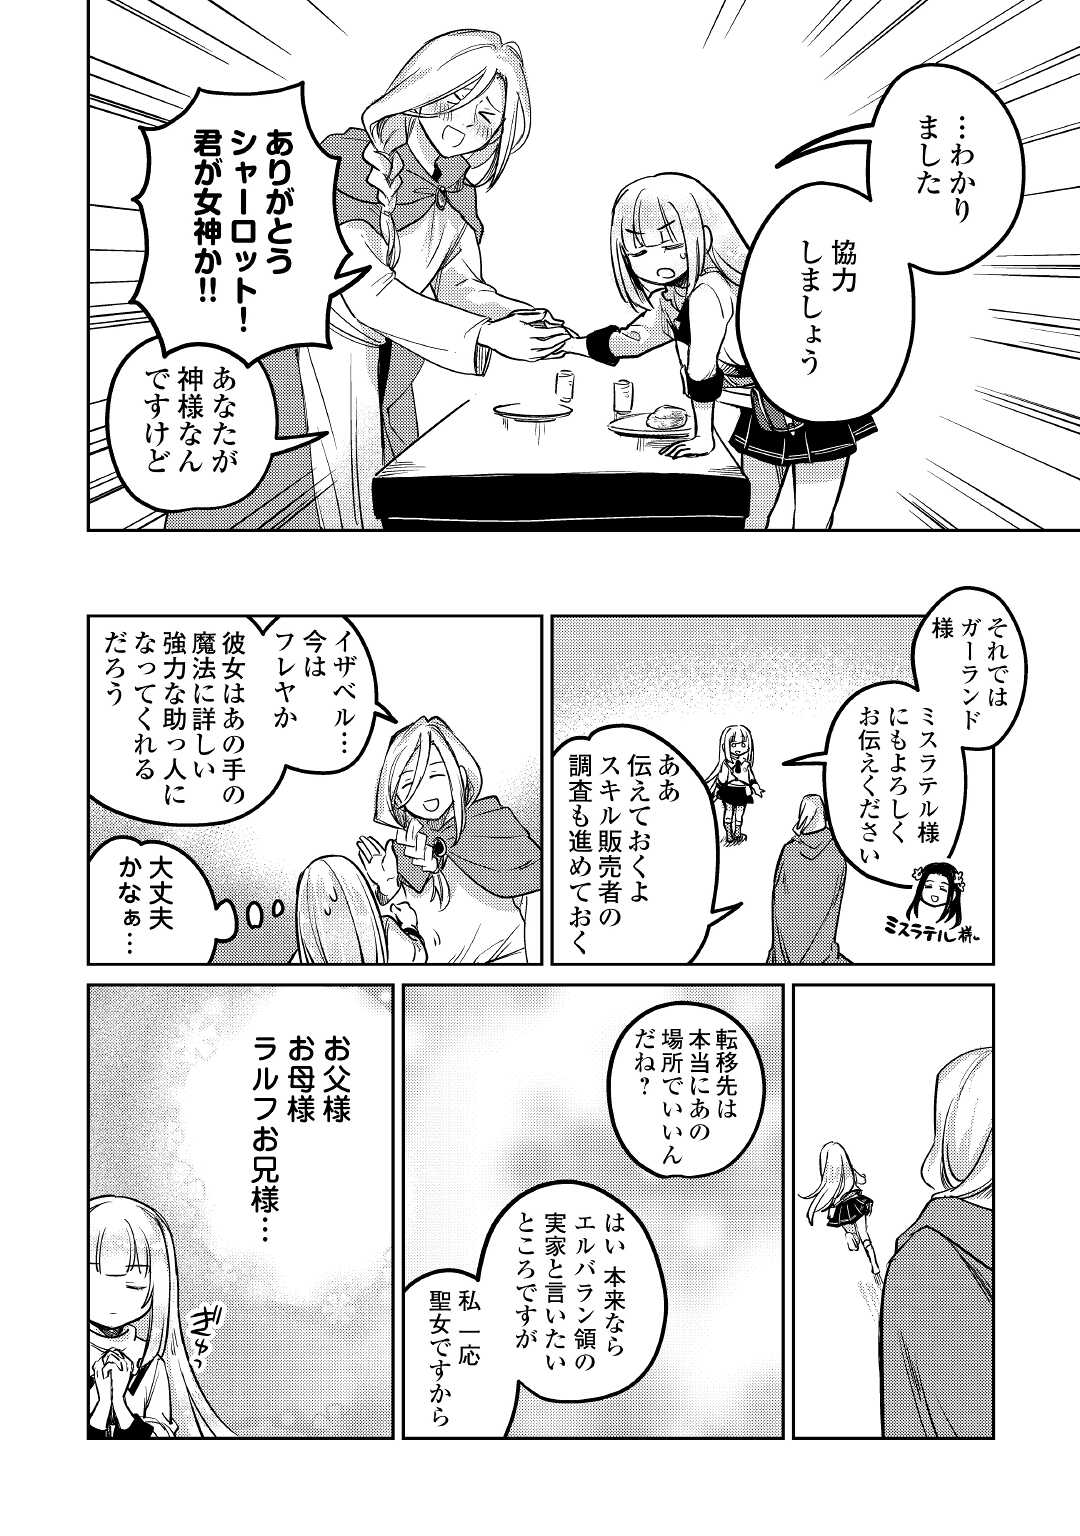 The Former Structural Researcher’s Story of Otherworldly Adventure 第41話 - Page 22